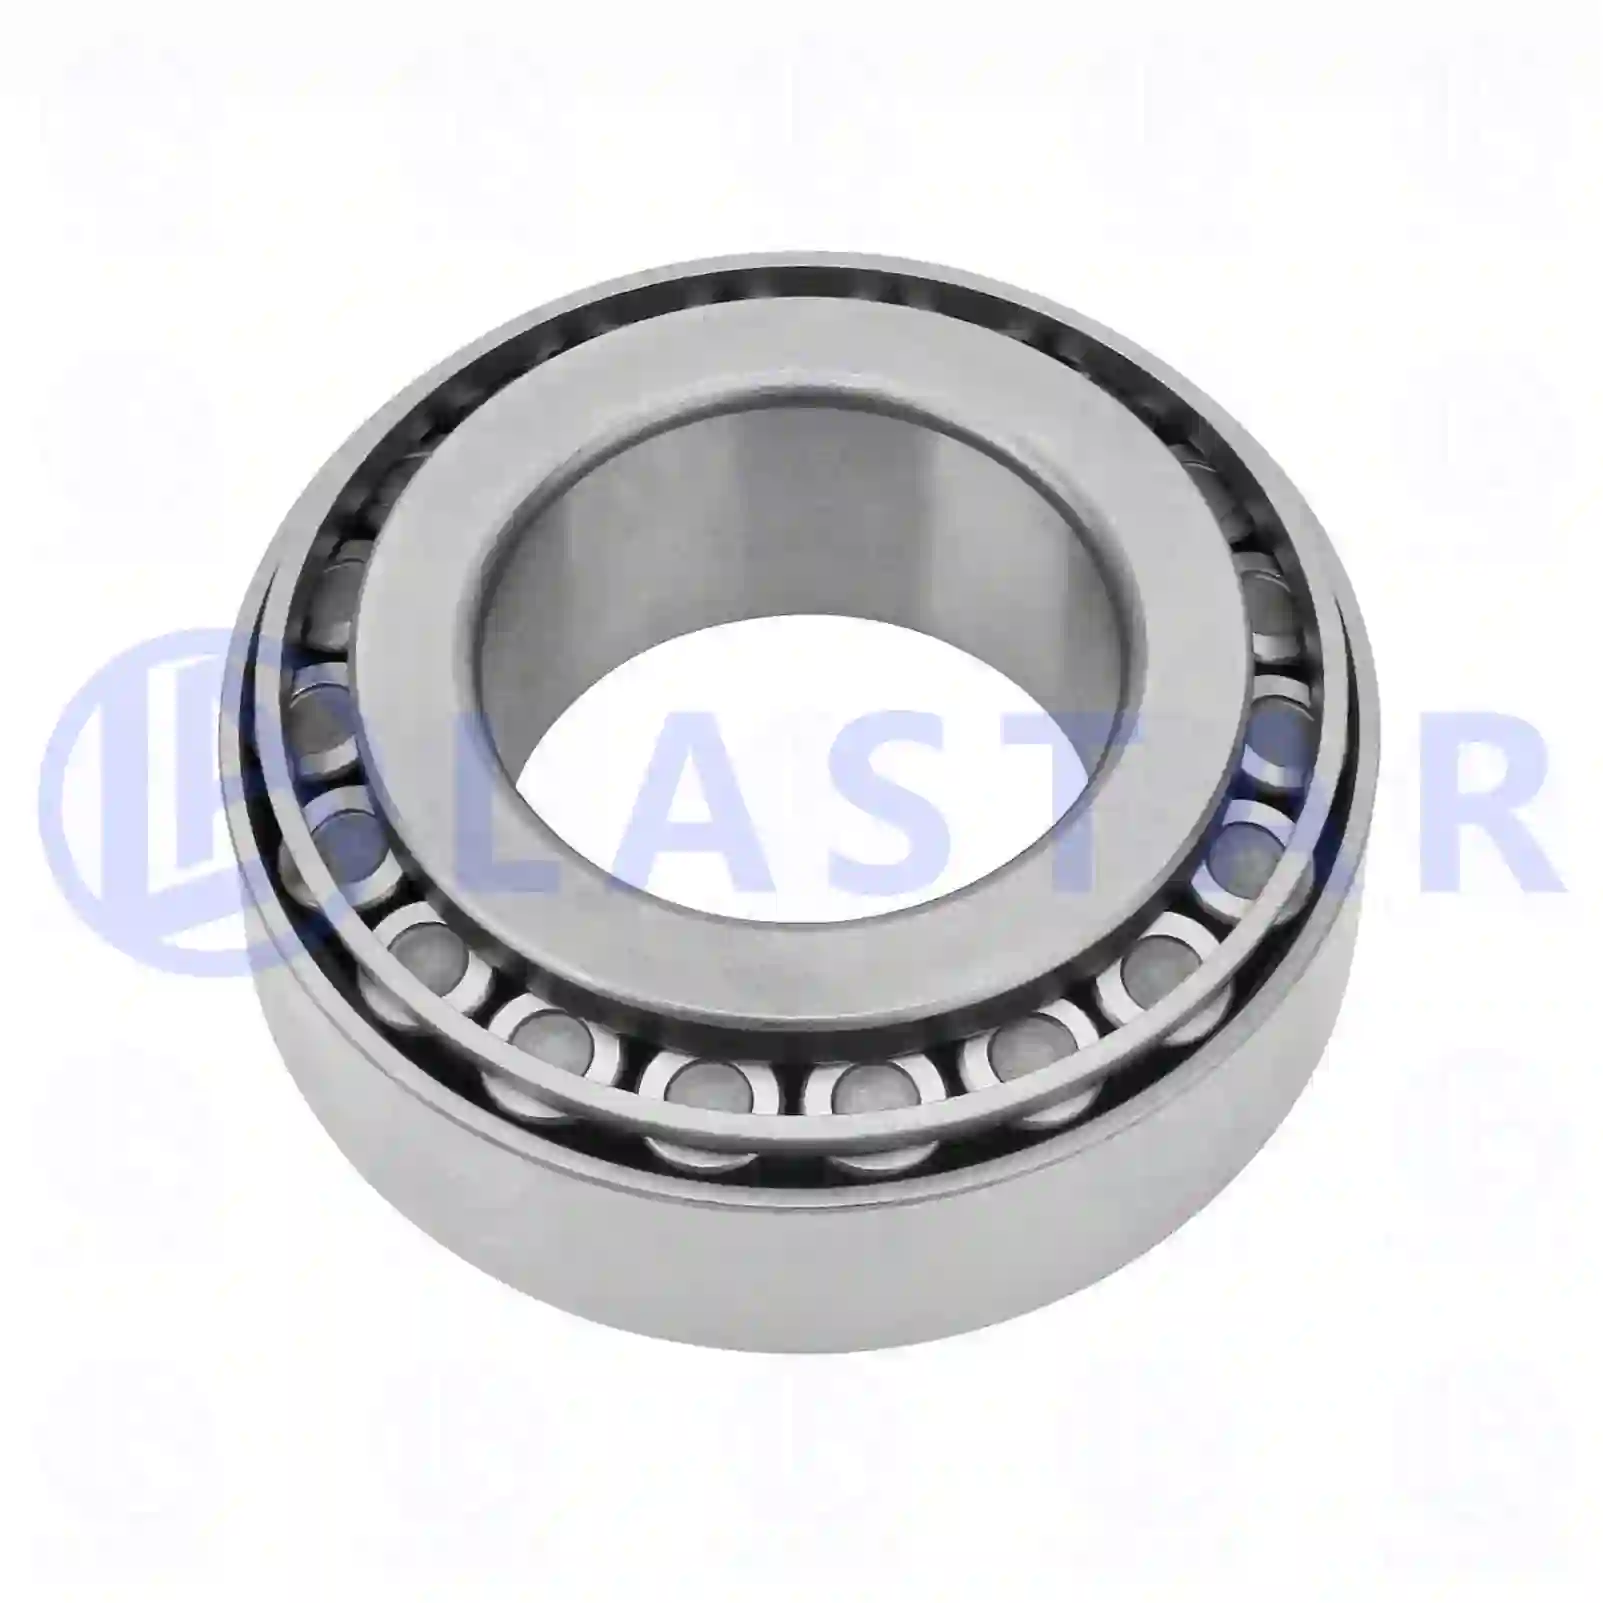 Tapered roller bearing, 77725199, 0264076500, 0264076700, 0264102200, 06324890006, 06324890046, 0019800902, 0039813705, 0039817405, 0069816305, 5000437791, 5010368899, 5010368900, 5010439065, 99041045S, 4200006000, 184672, ZG03004-0008 ||  77725199 Lastar Spare Part | Truck Spare Parts, Auotomotive Spare Parts Tapered roller bearing, 77725199, 0264076500, 0264076700, 0264102200, 06324890006, 06324890046, 0019800902, 0039813705, 0039817405, 0069816305, 5000437791, 5010368899, 5010368900, 5010439065, 99041045S, 4200006000, 184672, ZG03004-0008 ||  77725199 Lastar Spare Part | Truck Spare Parts, Auotomotive Spare Parts